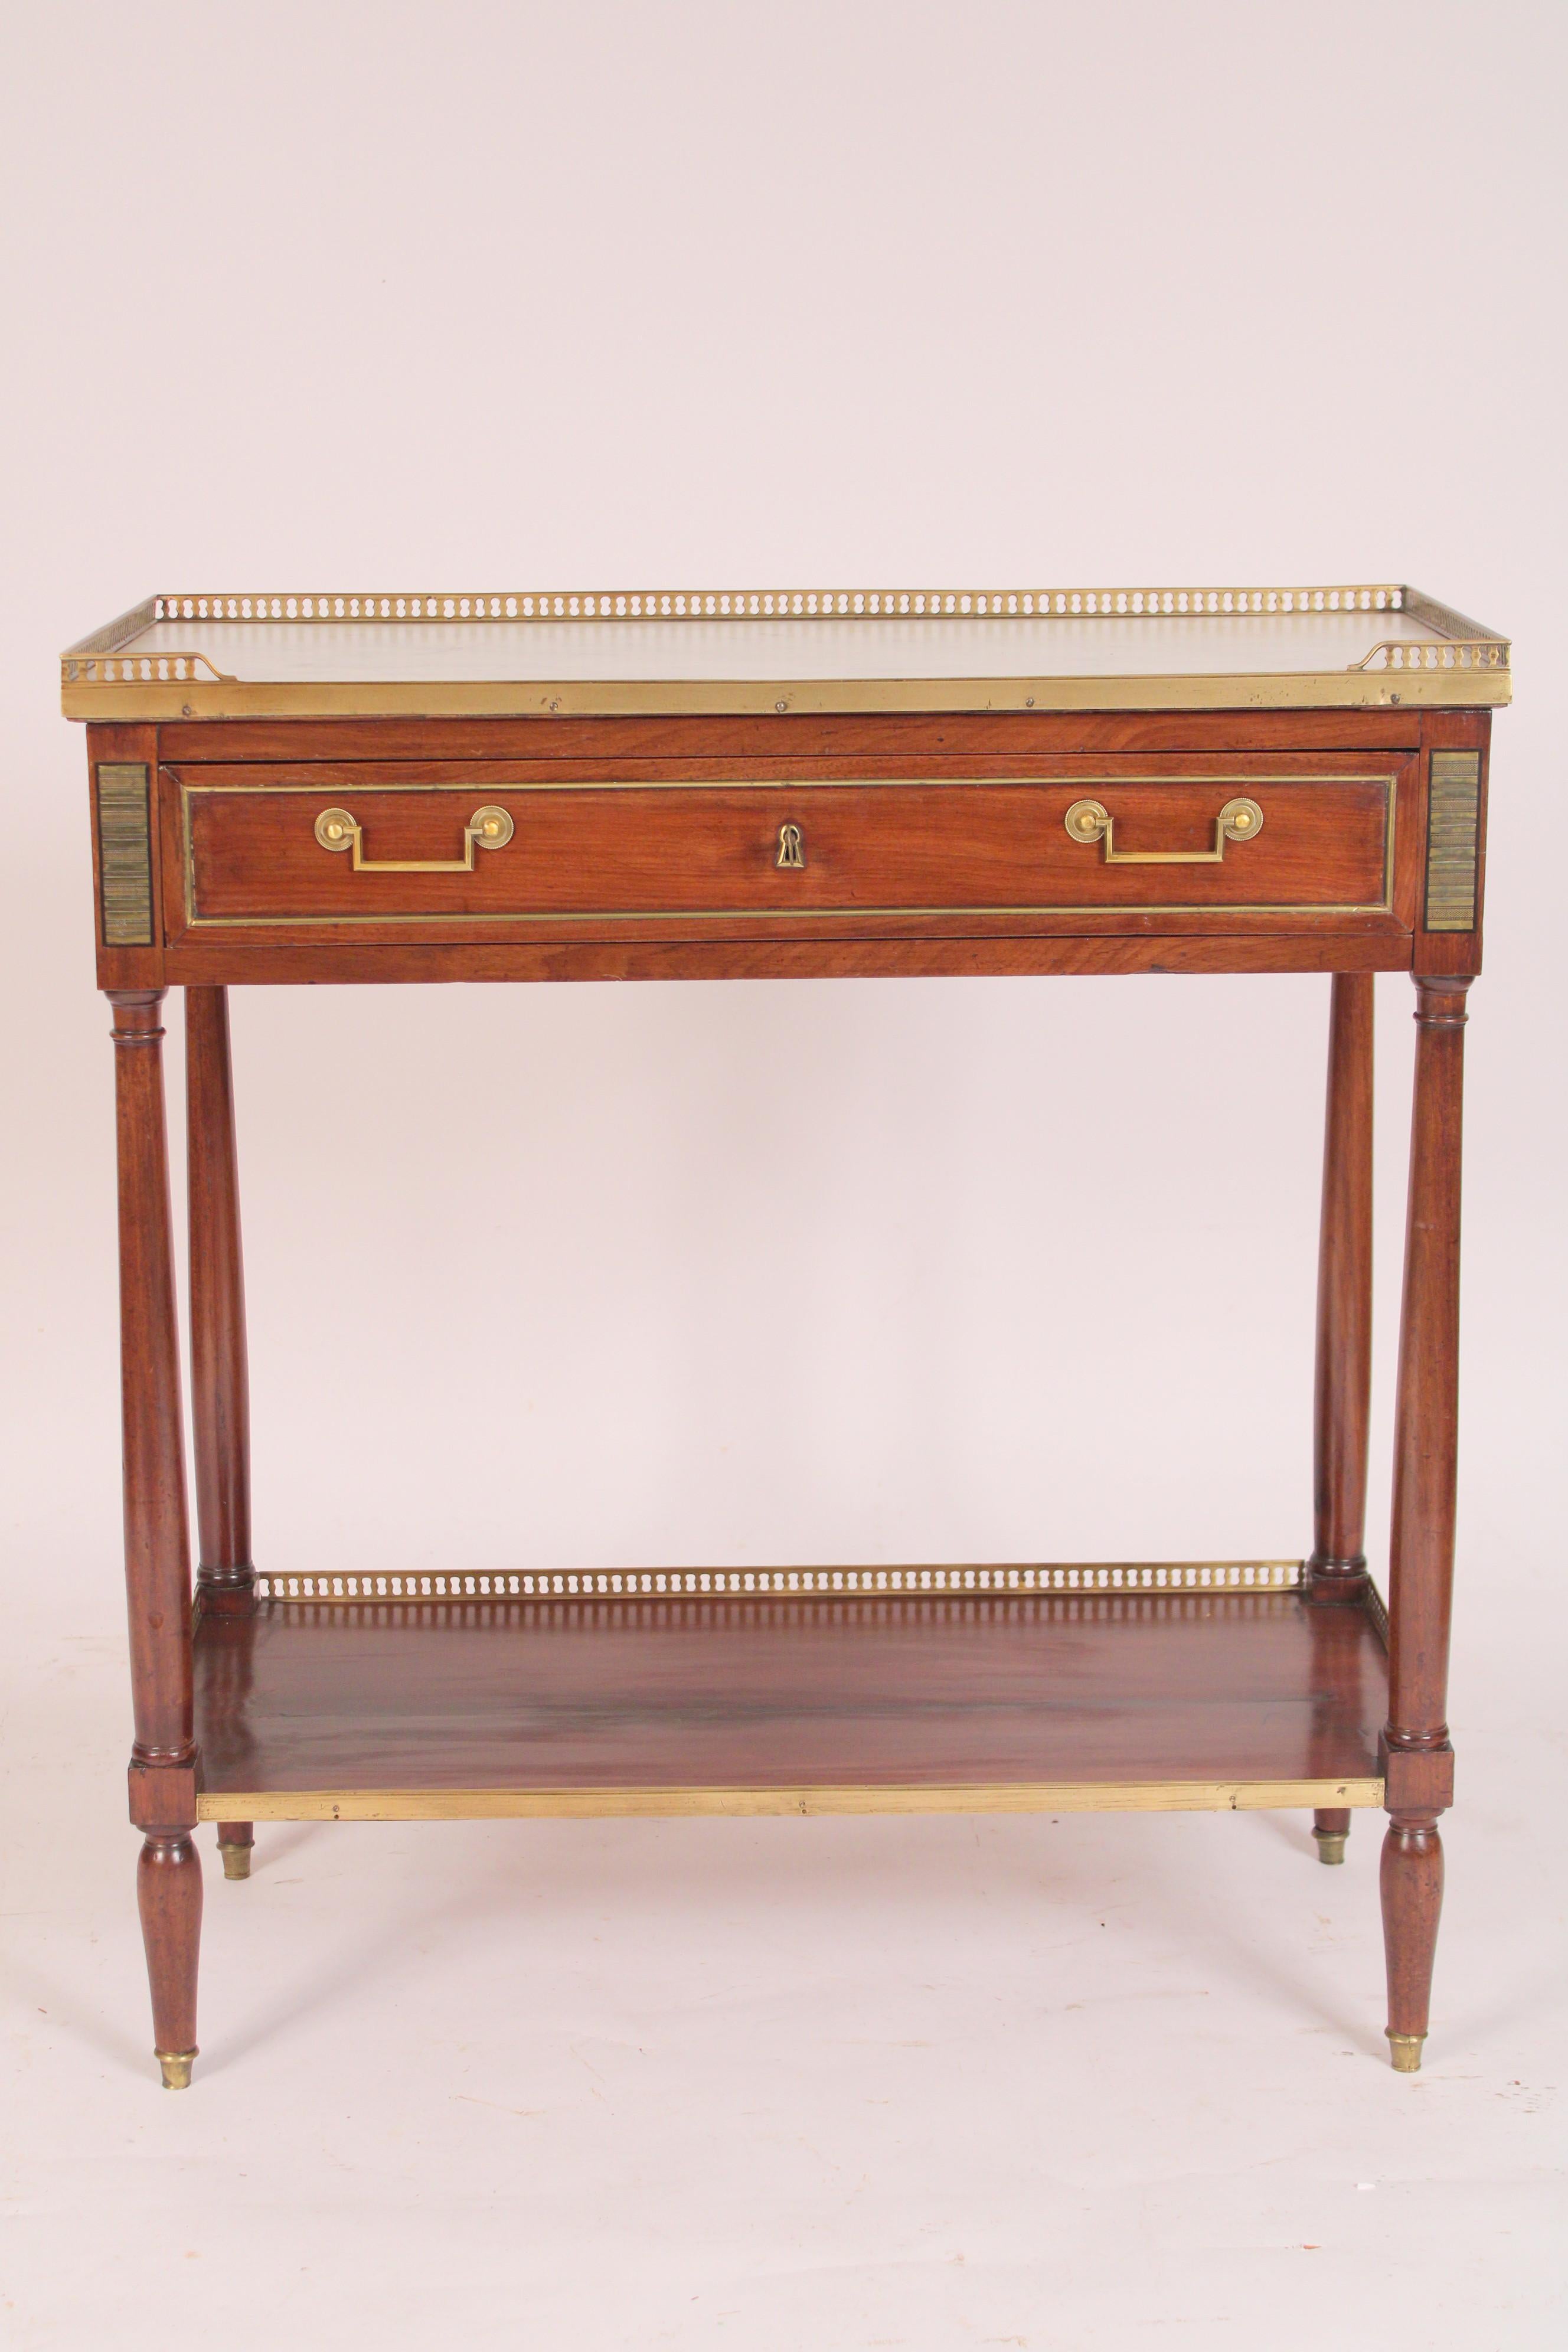 Antique Louis XVI style mahogany console desserte with marble top, 19th century. The carrera marble top with a reticulated brass gallery, a frieze drawer with brass molding and old brass hardware, turned supports between frieze drawer and lower